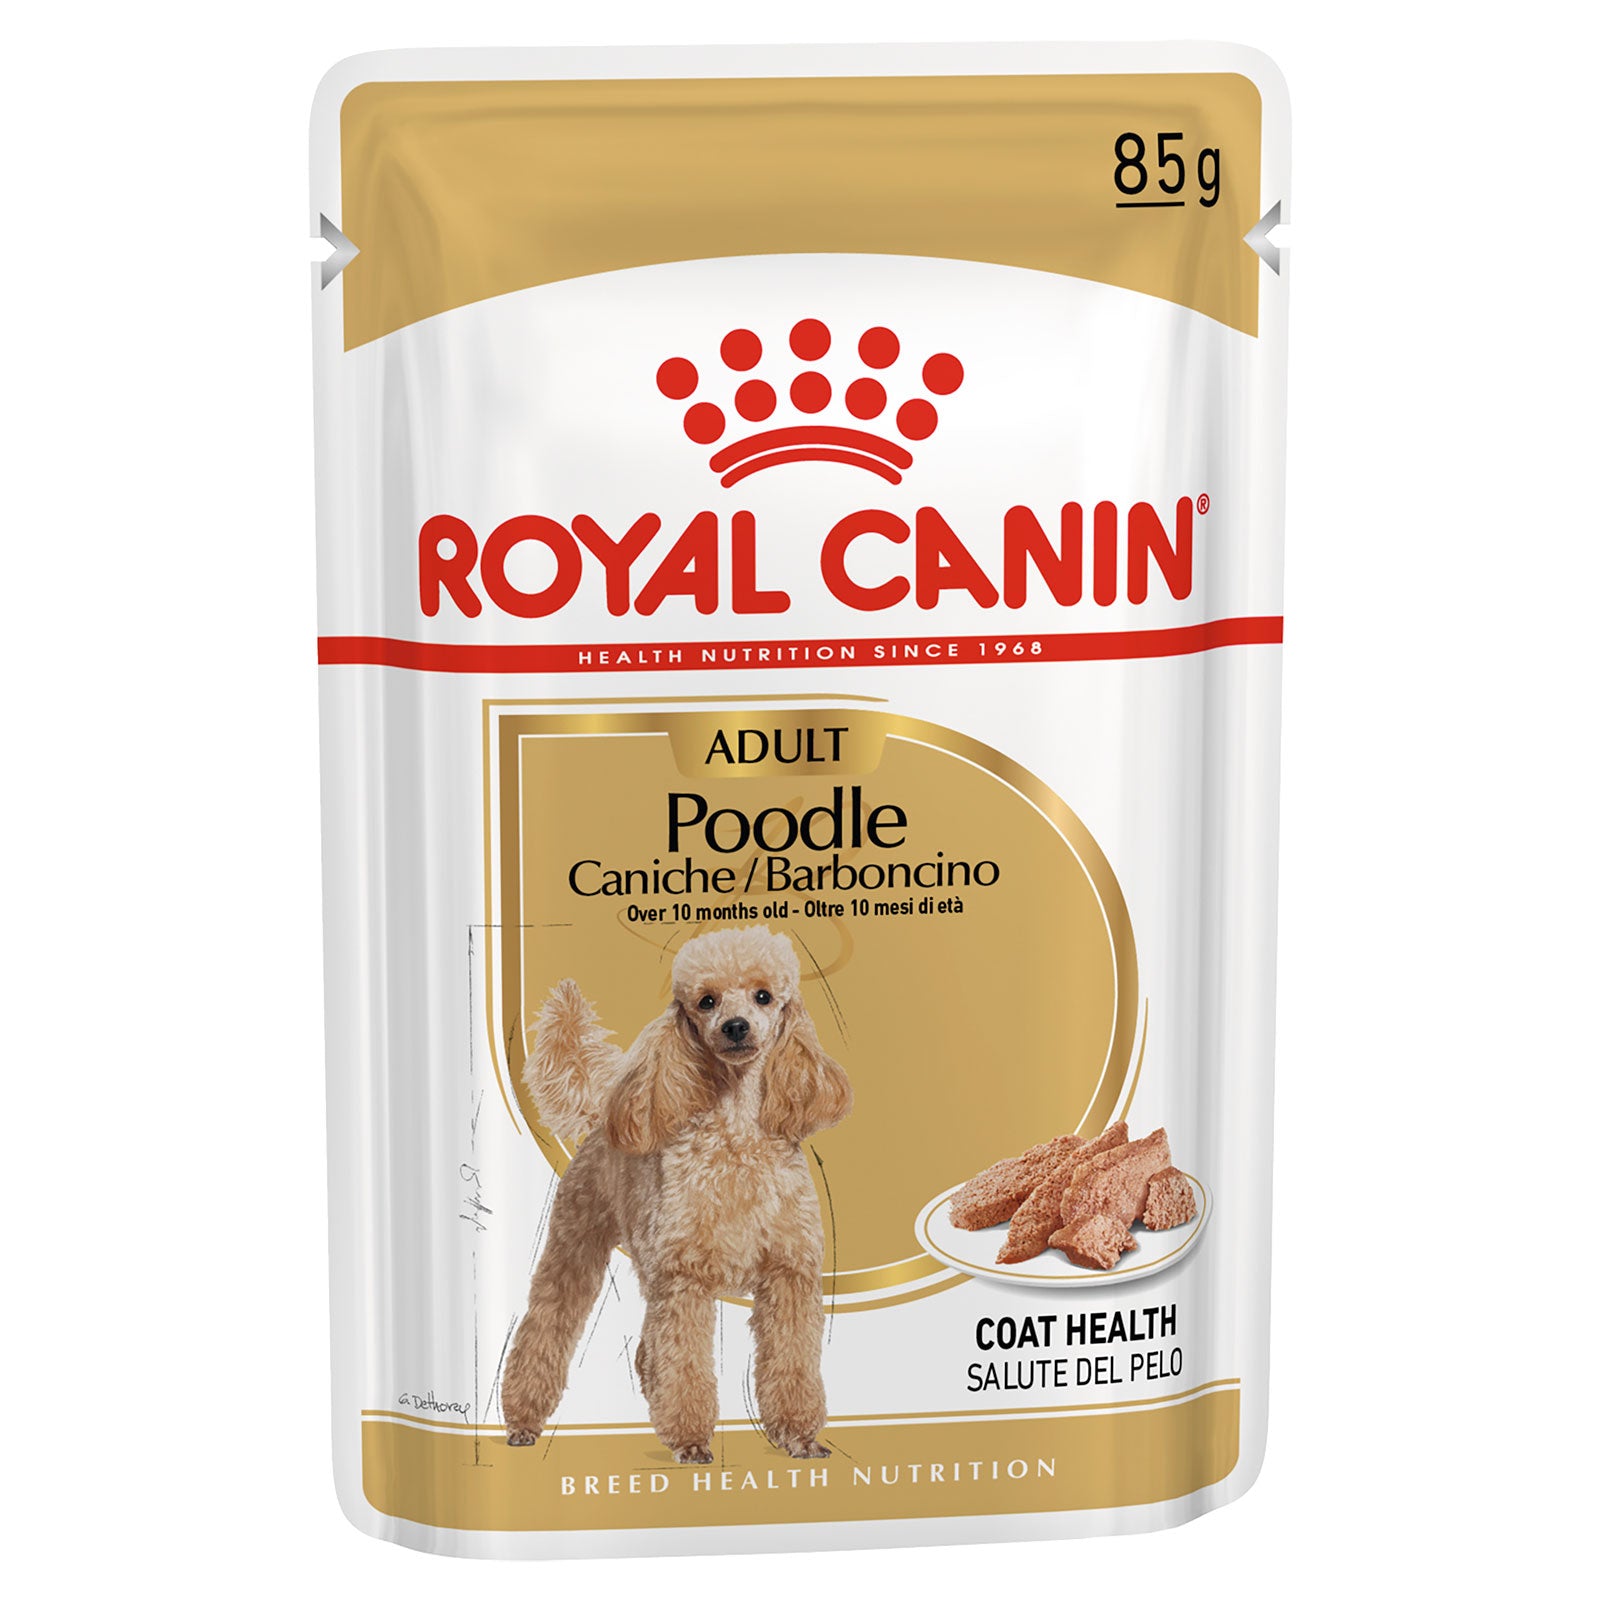 Royal Canin Dog Food Pouch Adult Poodle